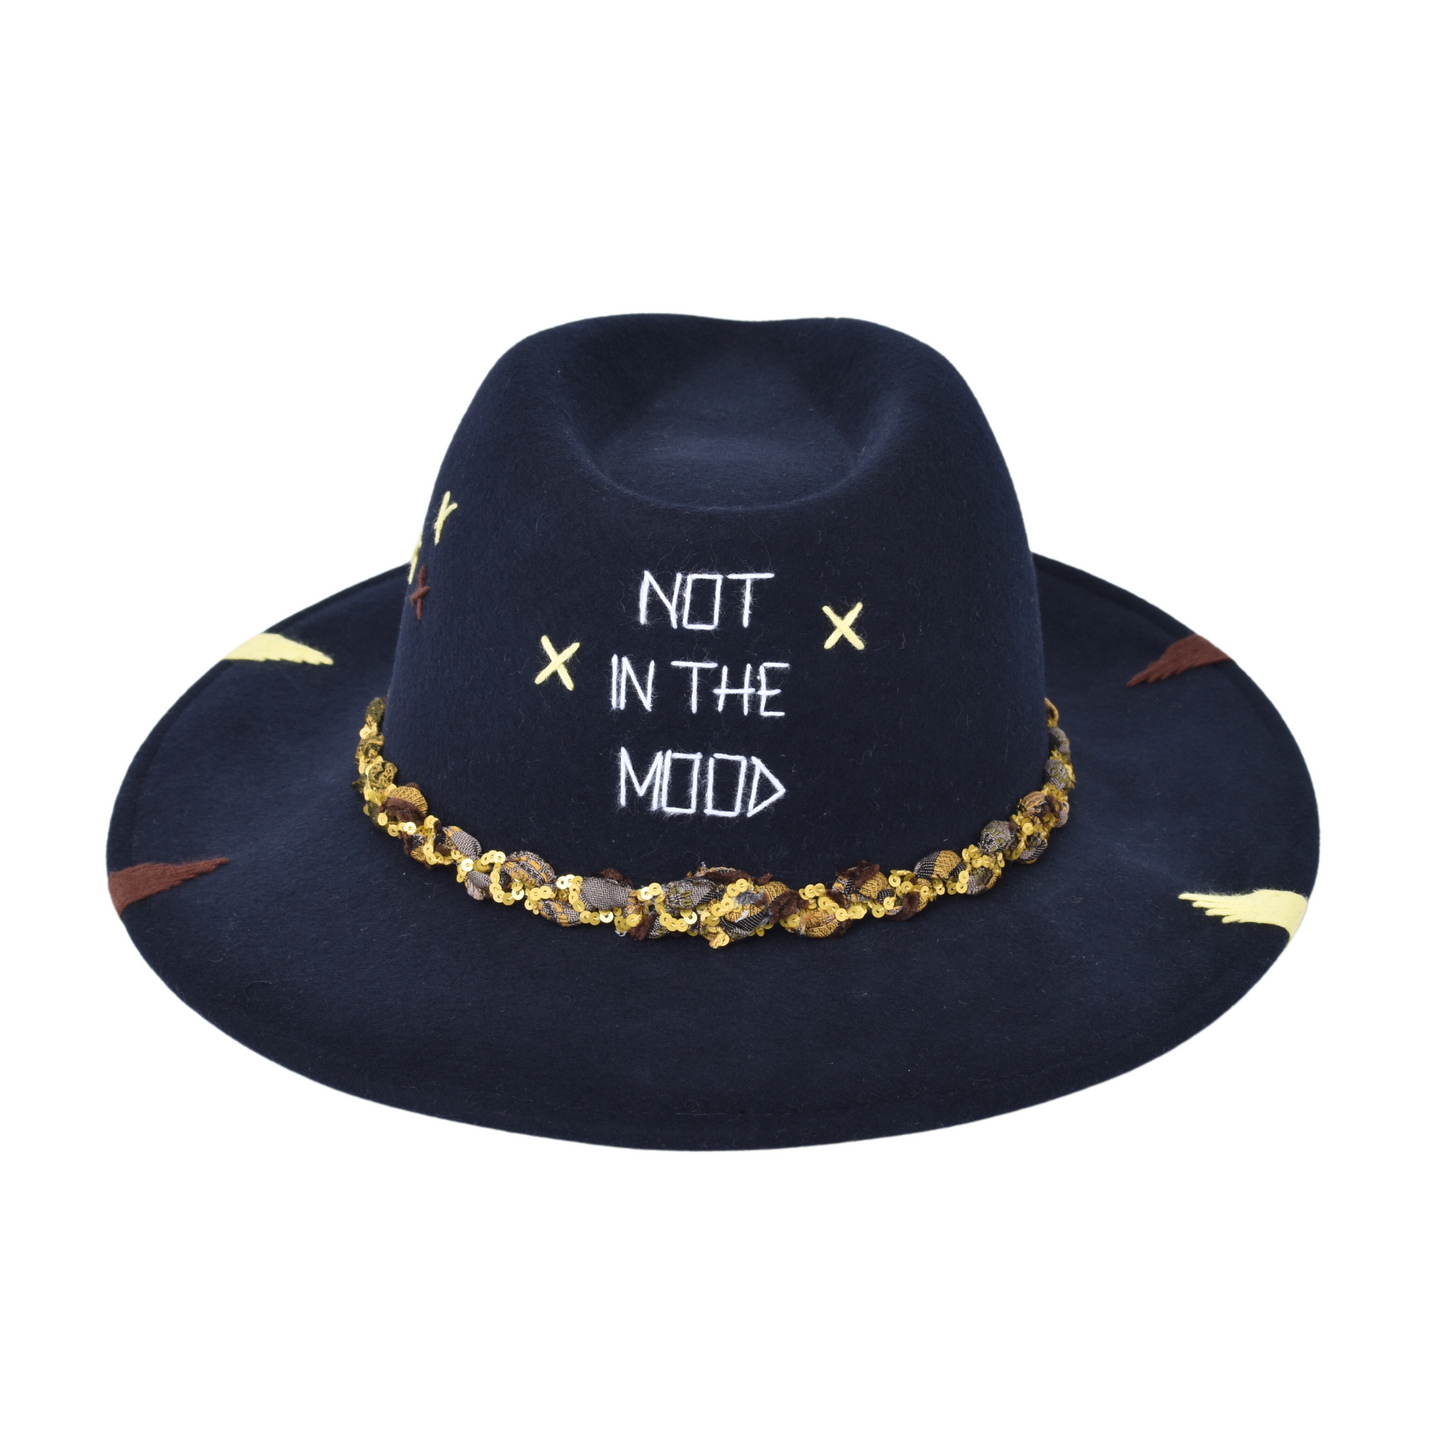 NOT IN THE MOOD - Blu Navy